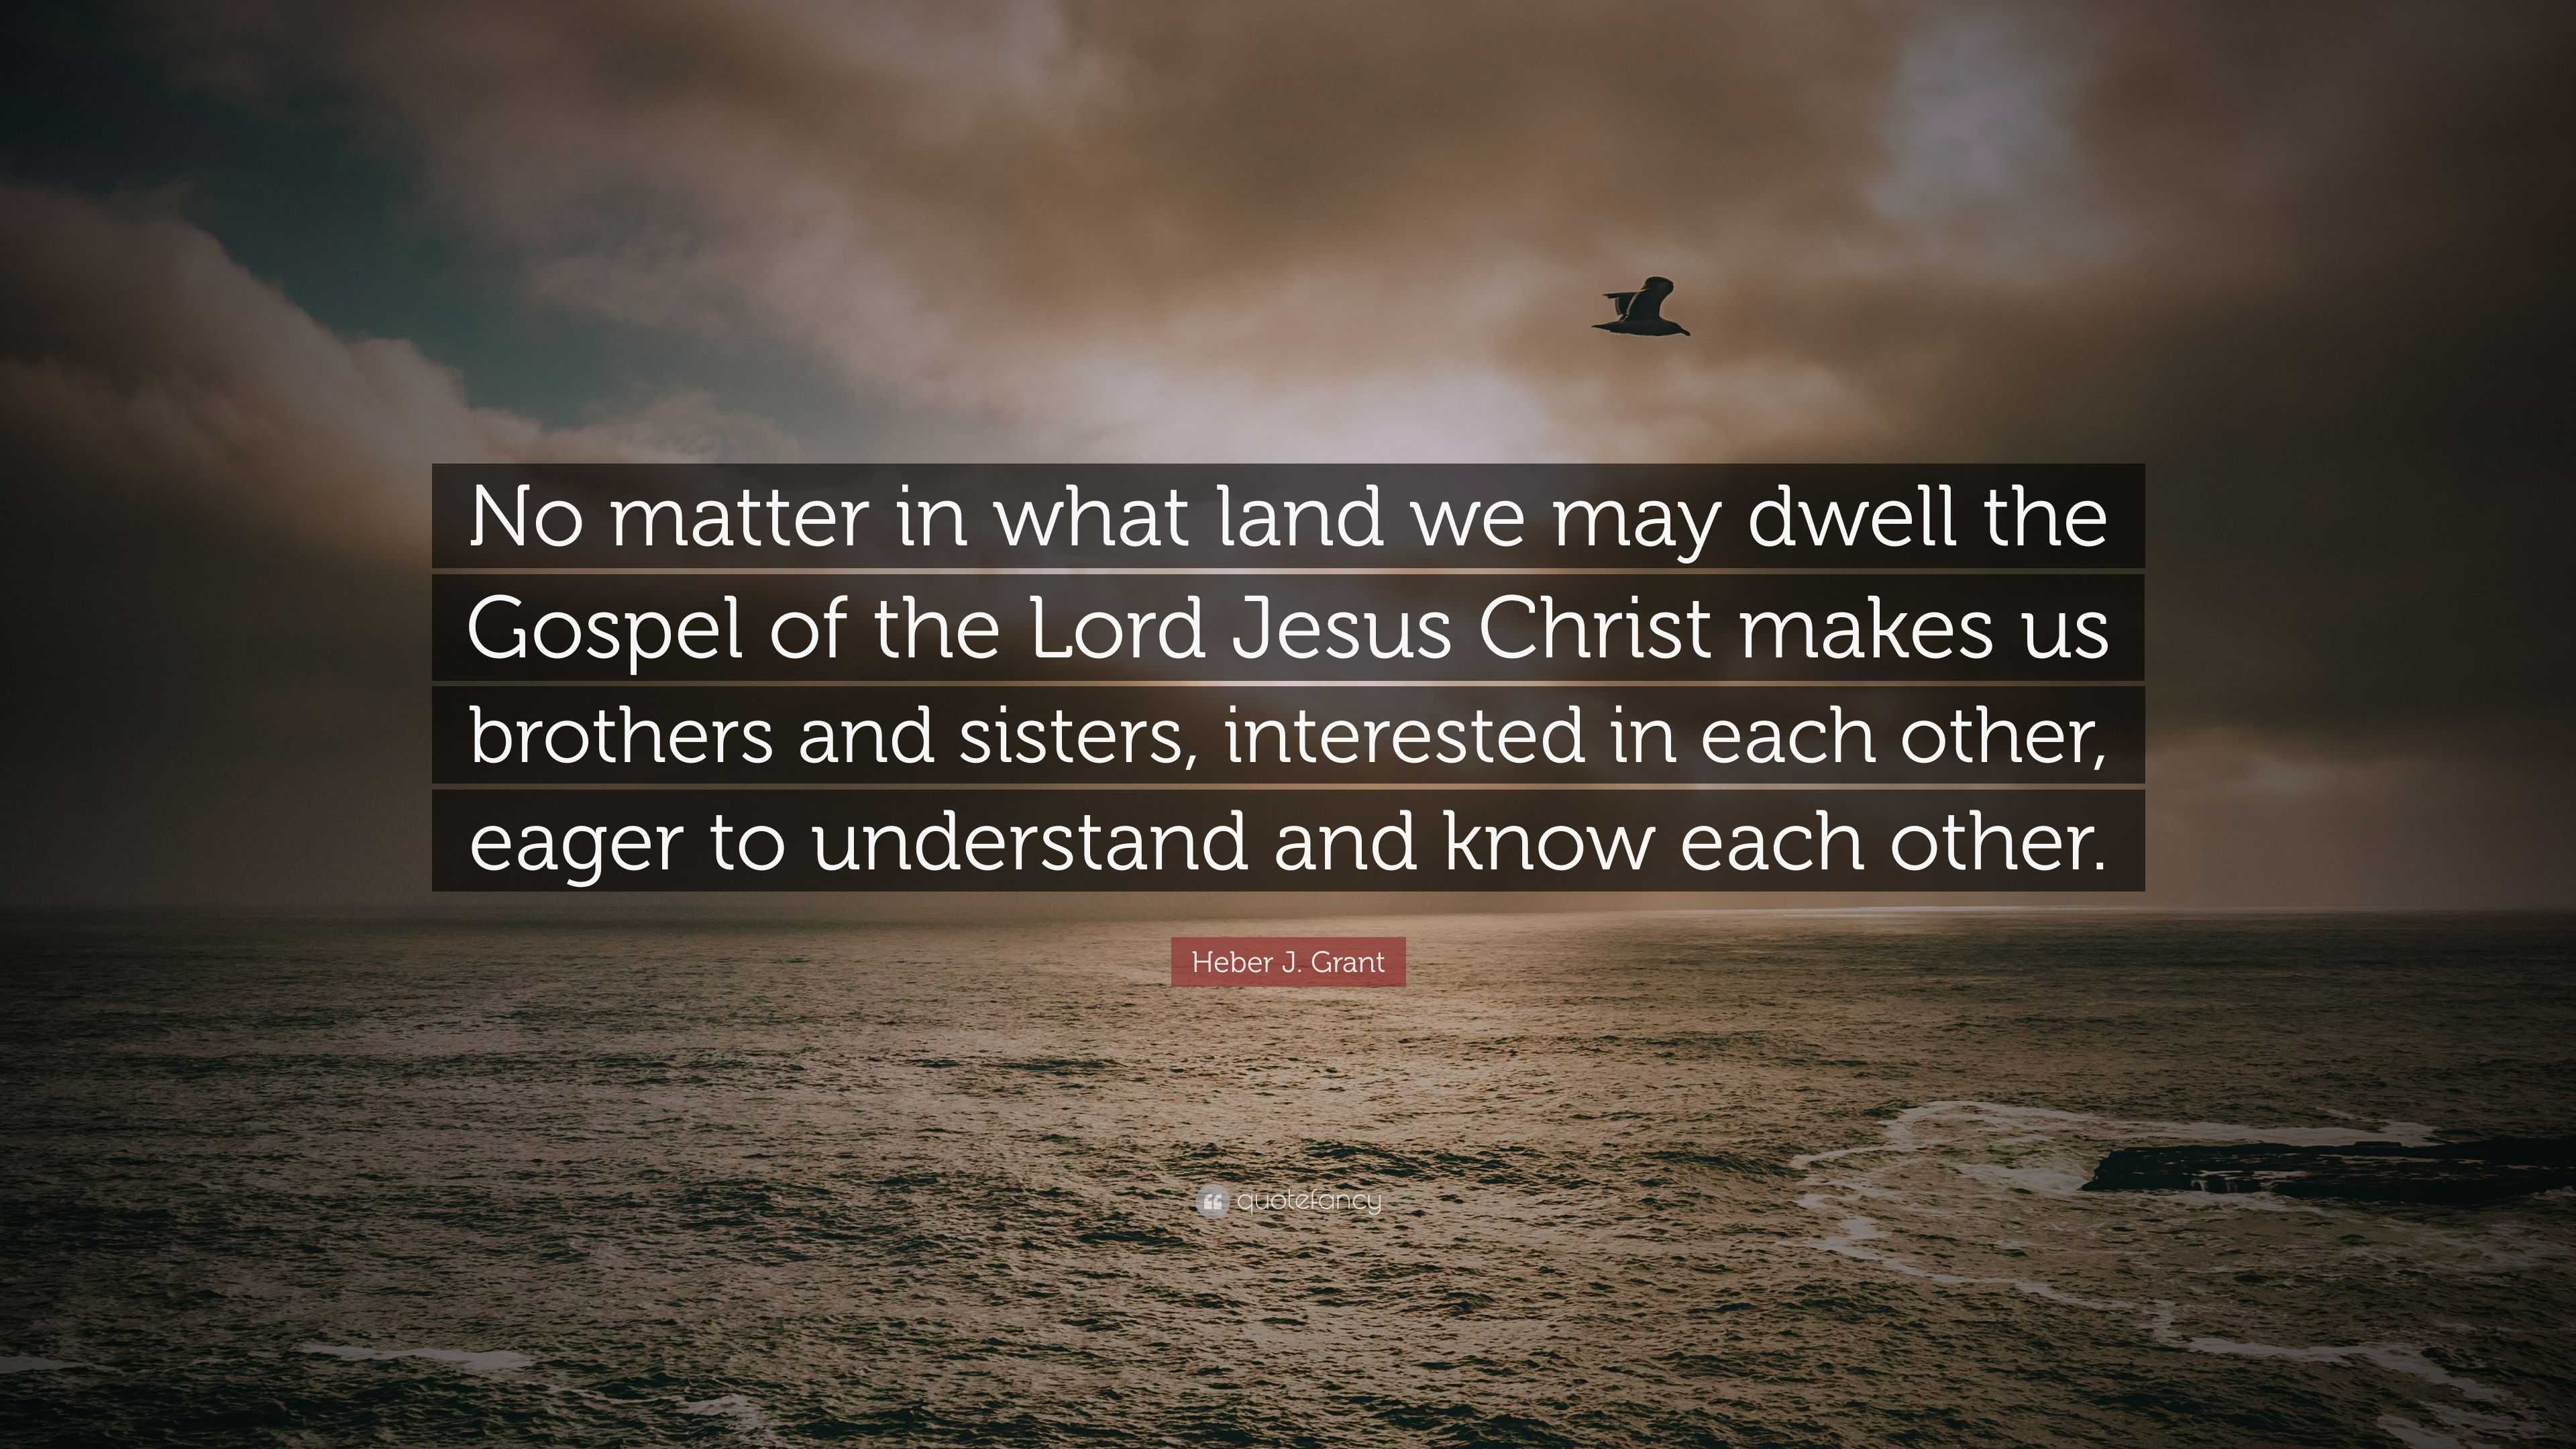 Heber J. Grant Quote: “No matter in what land we may dwell the Gospel ...